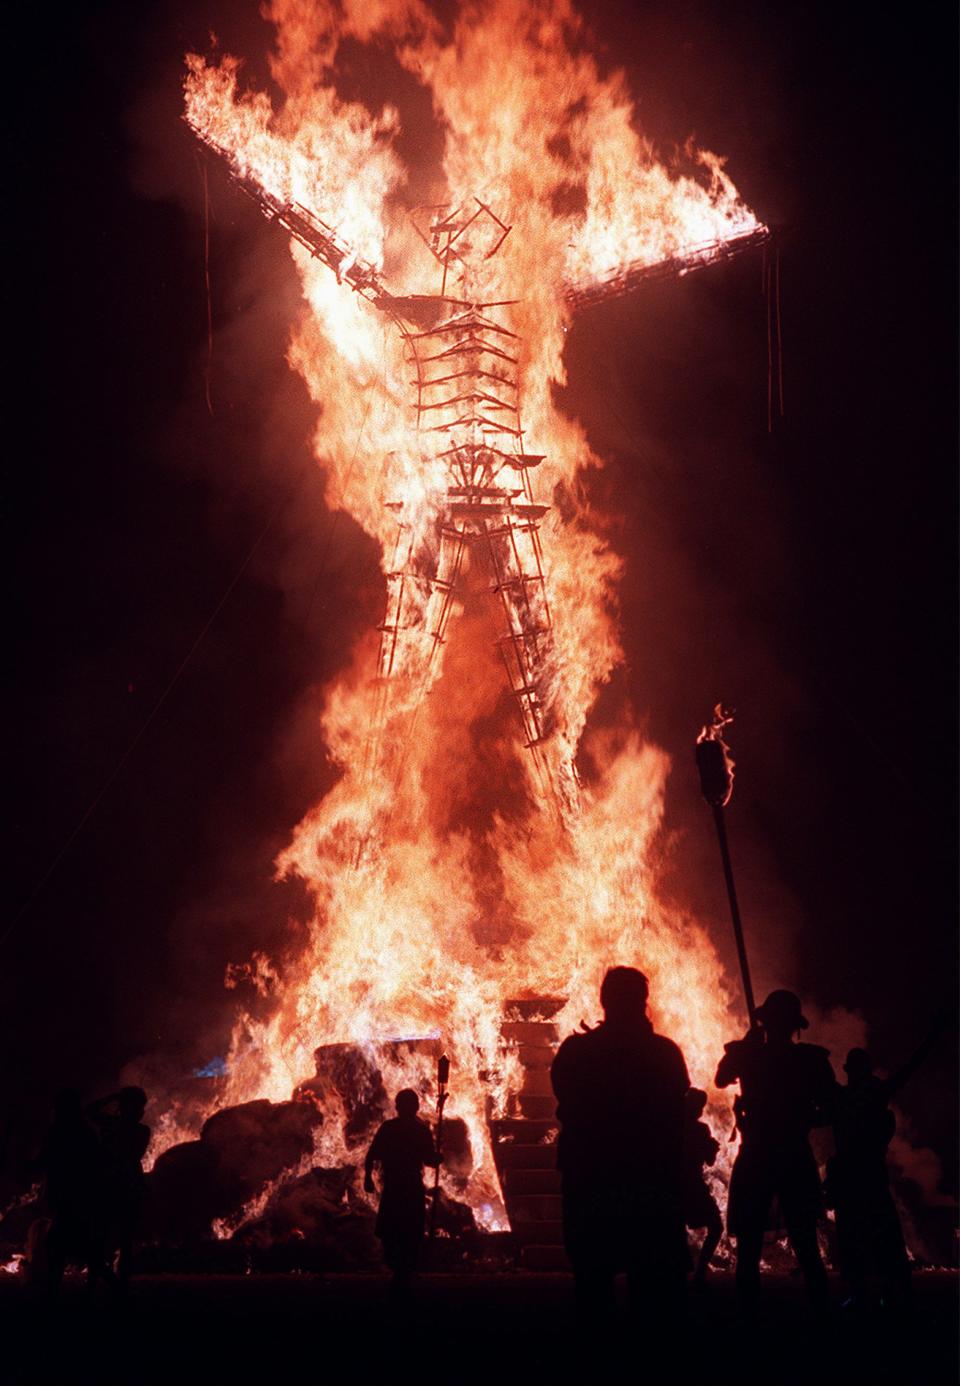 Hold for Story moving for Sunday AM's: In this file photo taken Sunday, Sept. 6, 1998, the 40-foot tall Burning Man is ignited to signal the end of the week-long Burning Man Festival held on the Black Rock Desert near Gerlach, Nv. It's never been so hard to be a hippie. A quarter century after the free spirits moved their party from San Francisco's Baker Beach to a dried up ancient lake bed 110 miles north of Reno, the Burning Man counterculture festival is faced with turning large numbers of its longtime participants away. With its drum circles and decorated art cars, guerilla theatrics and colorful theme camps, the annual pilgrimage to the playa in the name of both everything and nothing has become just too darn popular for its own good. (AP Photo/Reno Gazette Journal, Roger Duncan) NO SALES; MAGS OUT; NEVADA APPEAL OUT; SOUTH RENO WEEKLY OUT